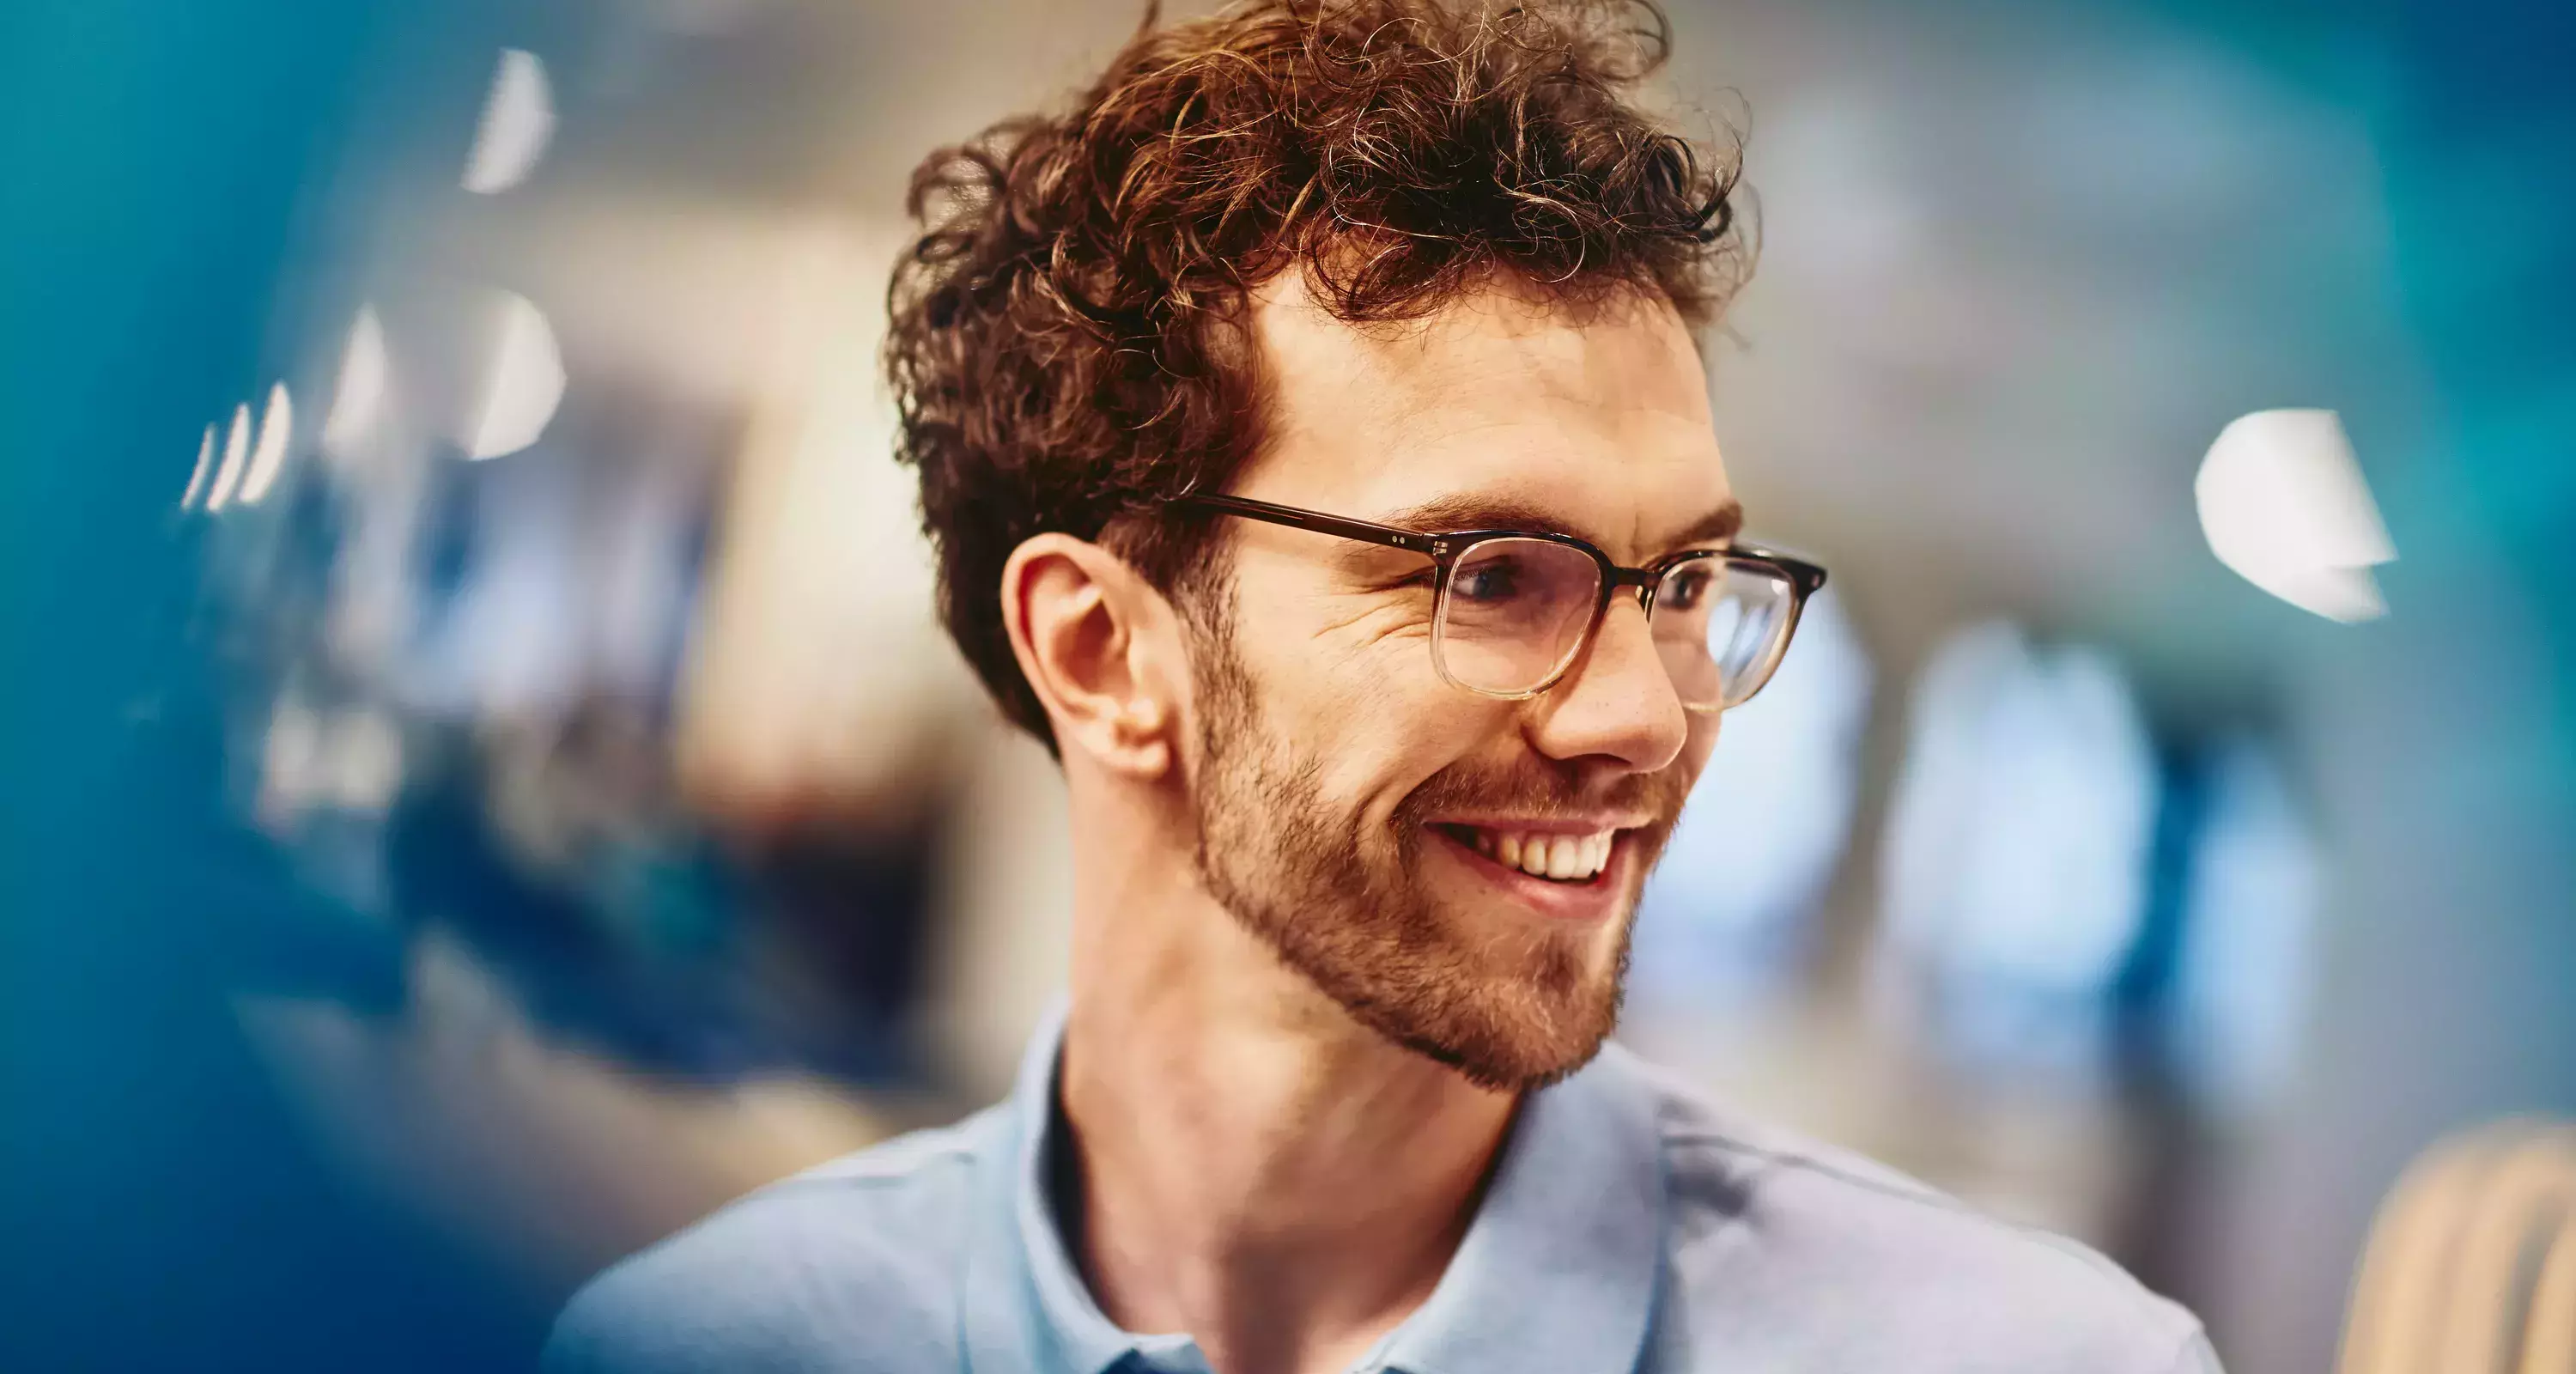 Male with glasses smiling and looking to the side
